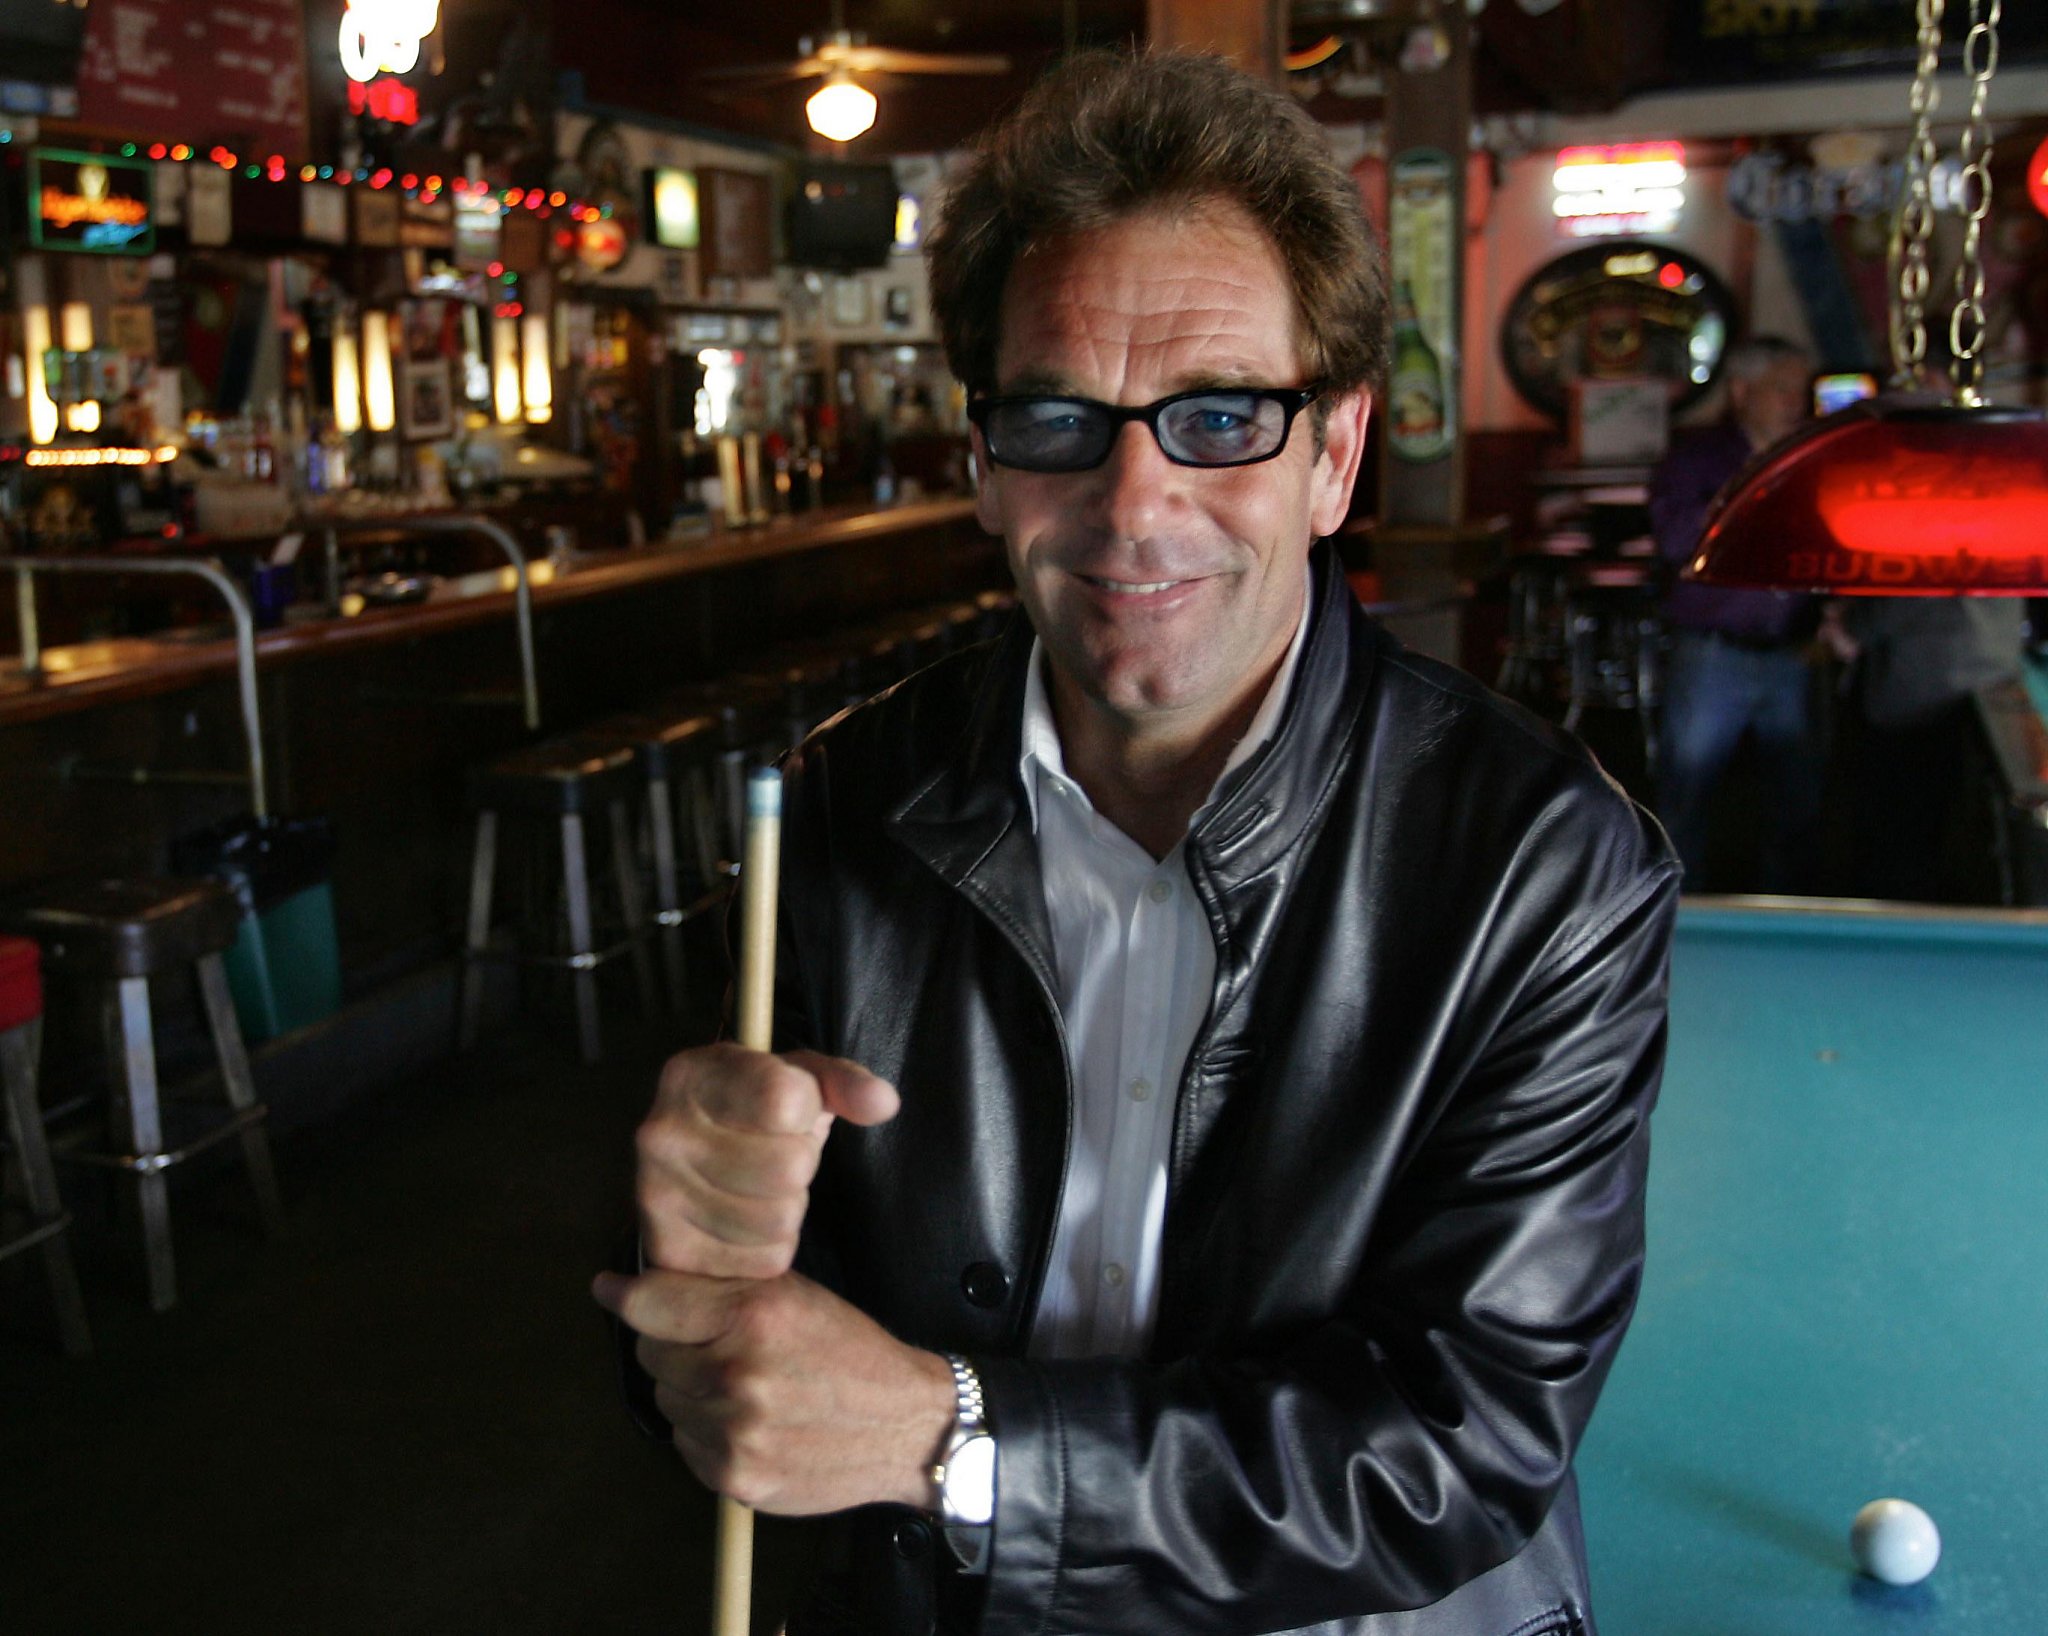 Huey Lewis returns to old stomping grounds with new music for film fest.